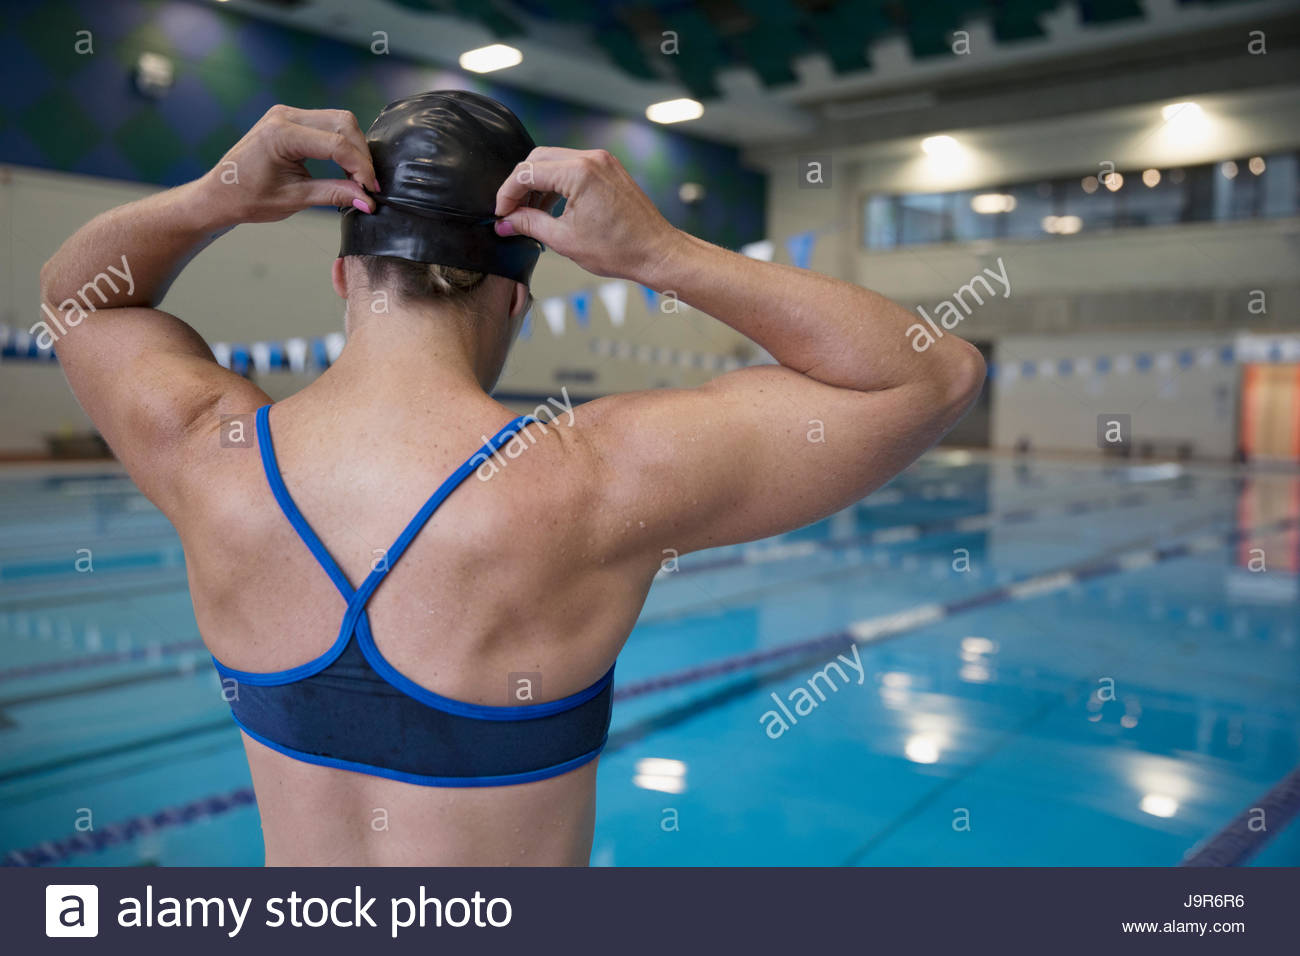 Rear view female swimmer adjusting swimming cap at swimming pool Stock Photo